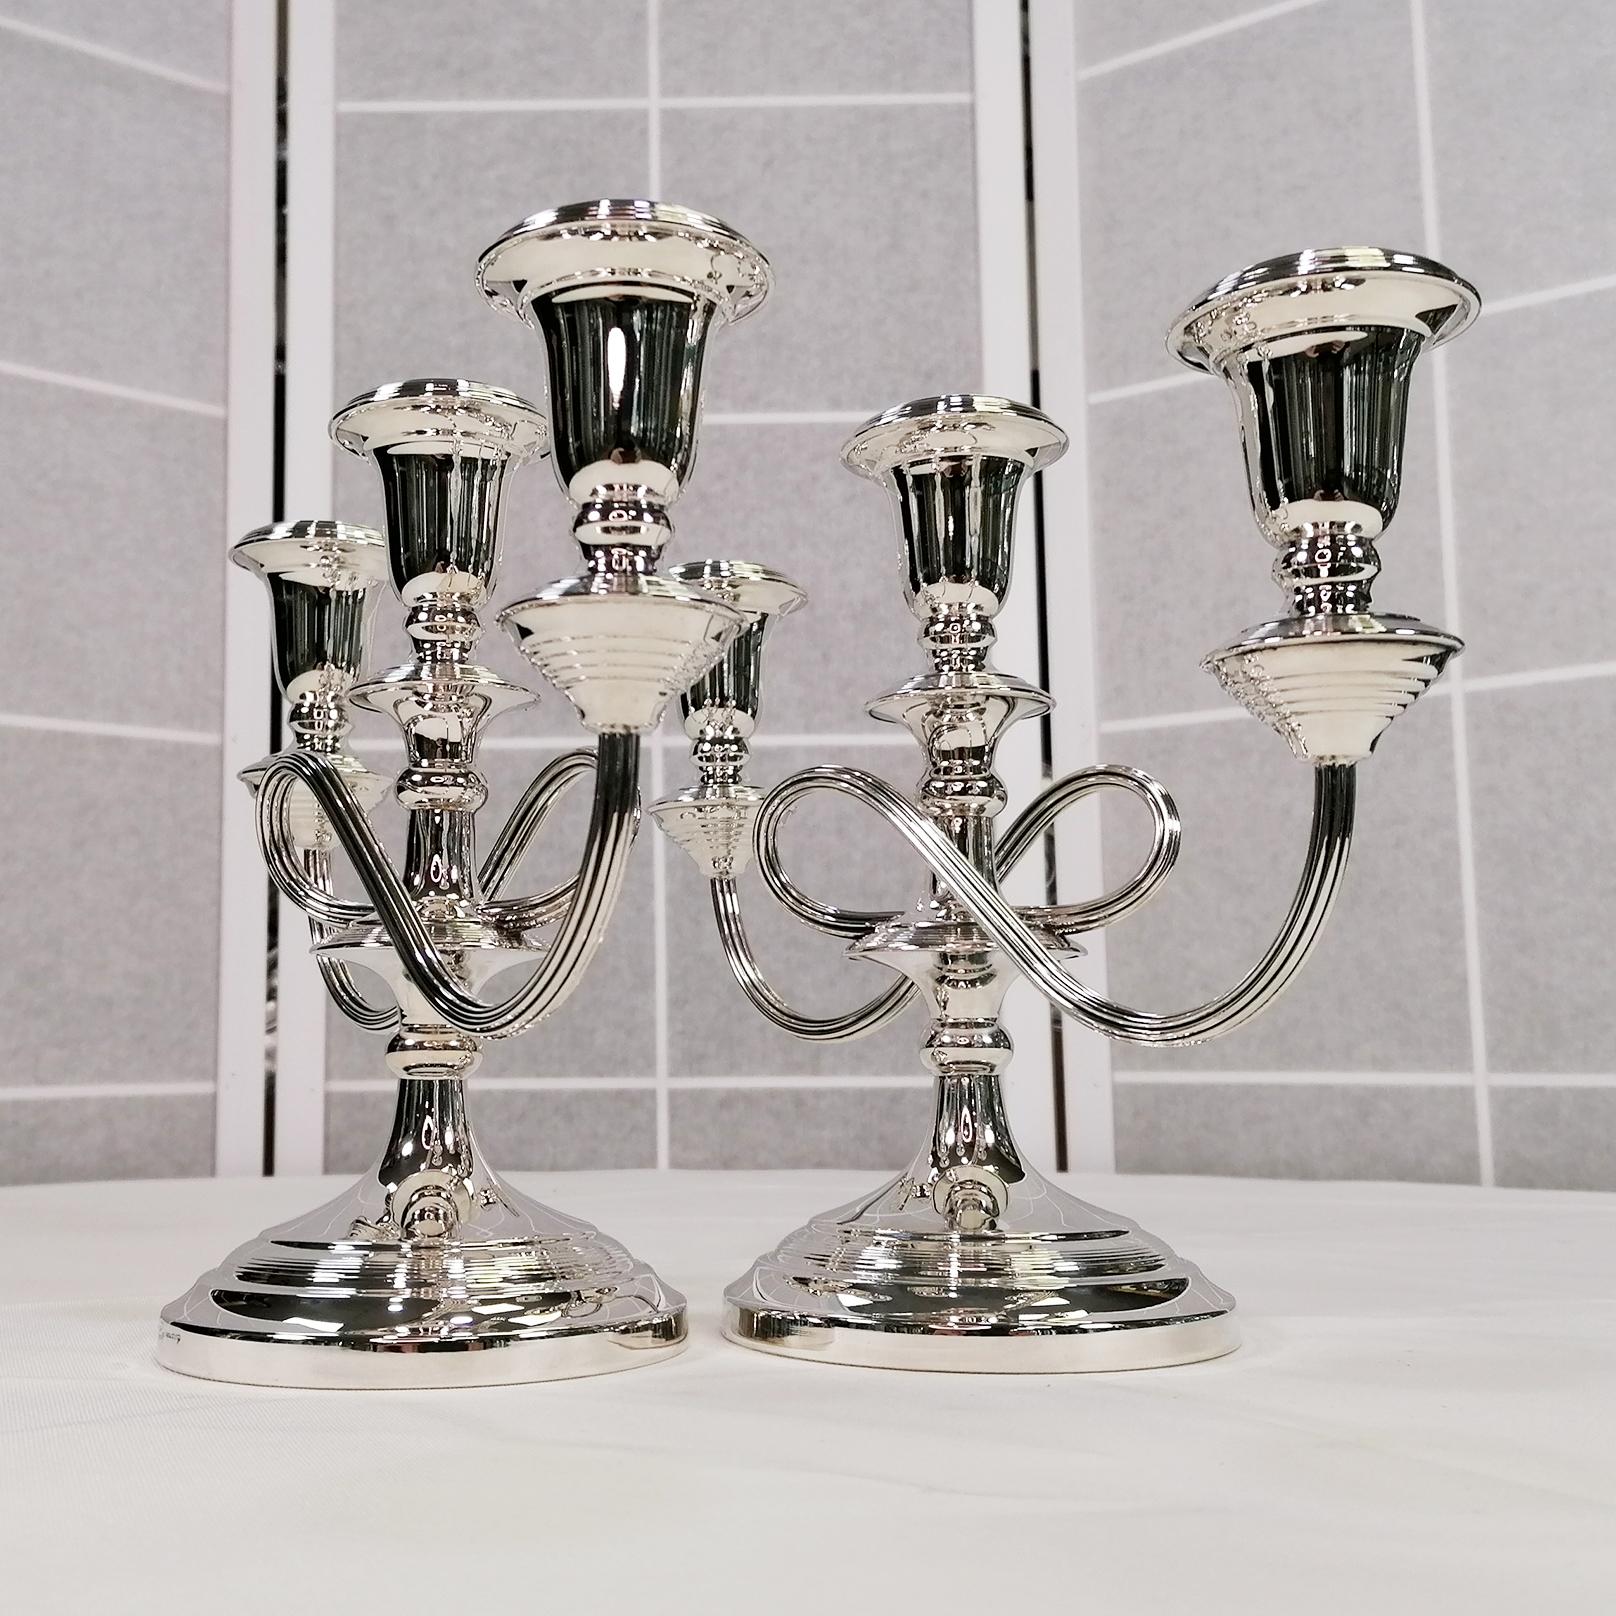 20th Century Italian solid Silver Pr. of Candelabras For Sale 11